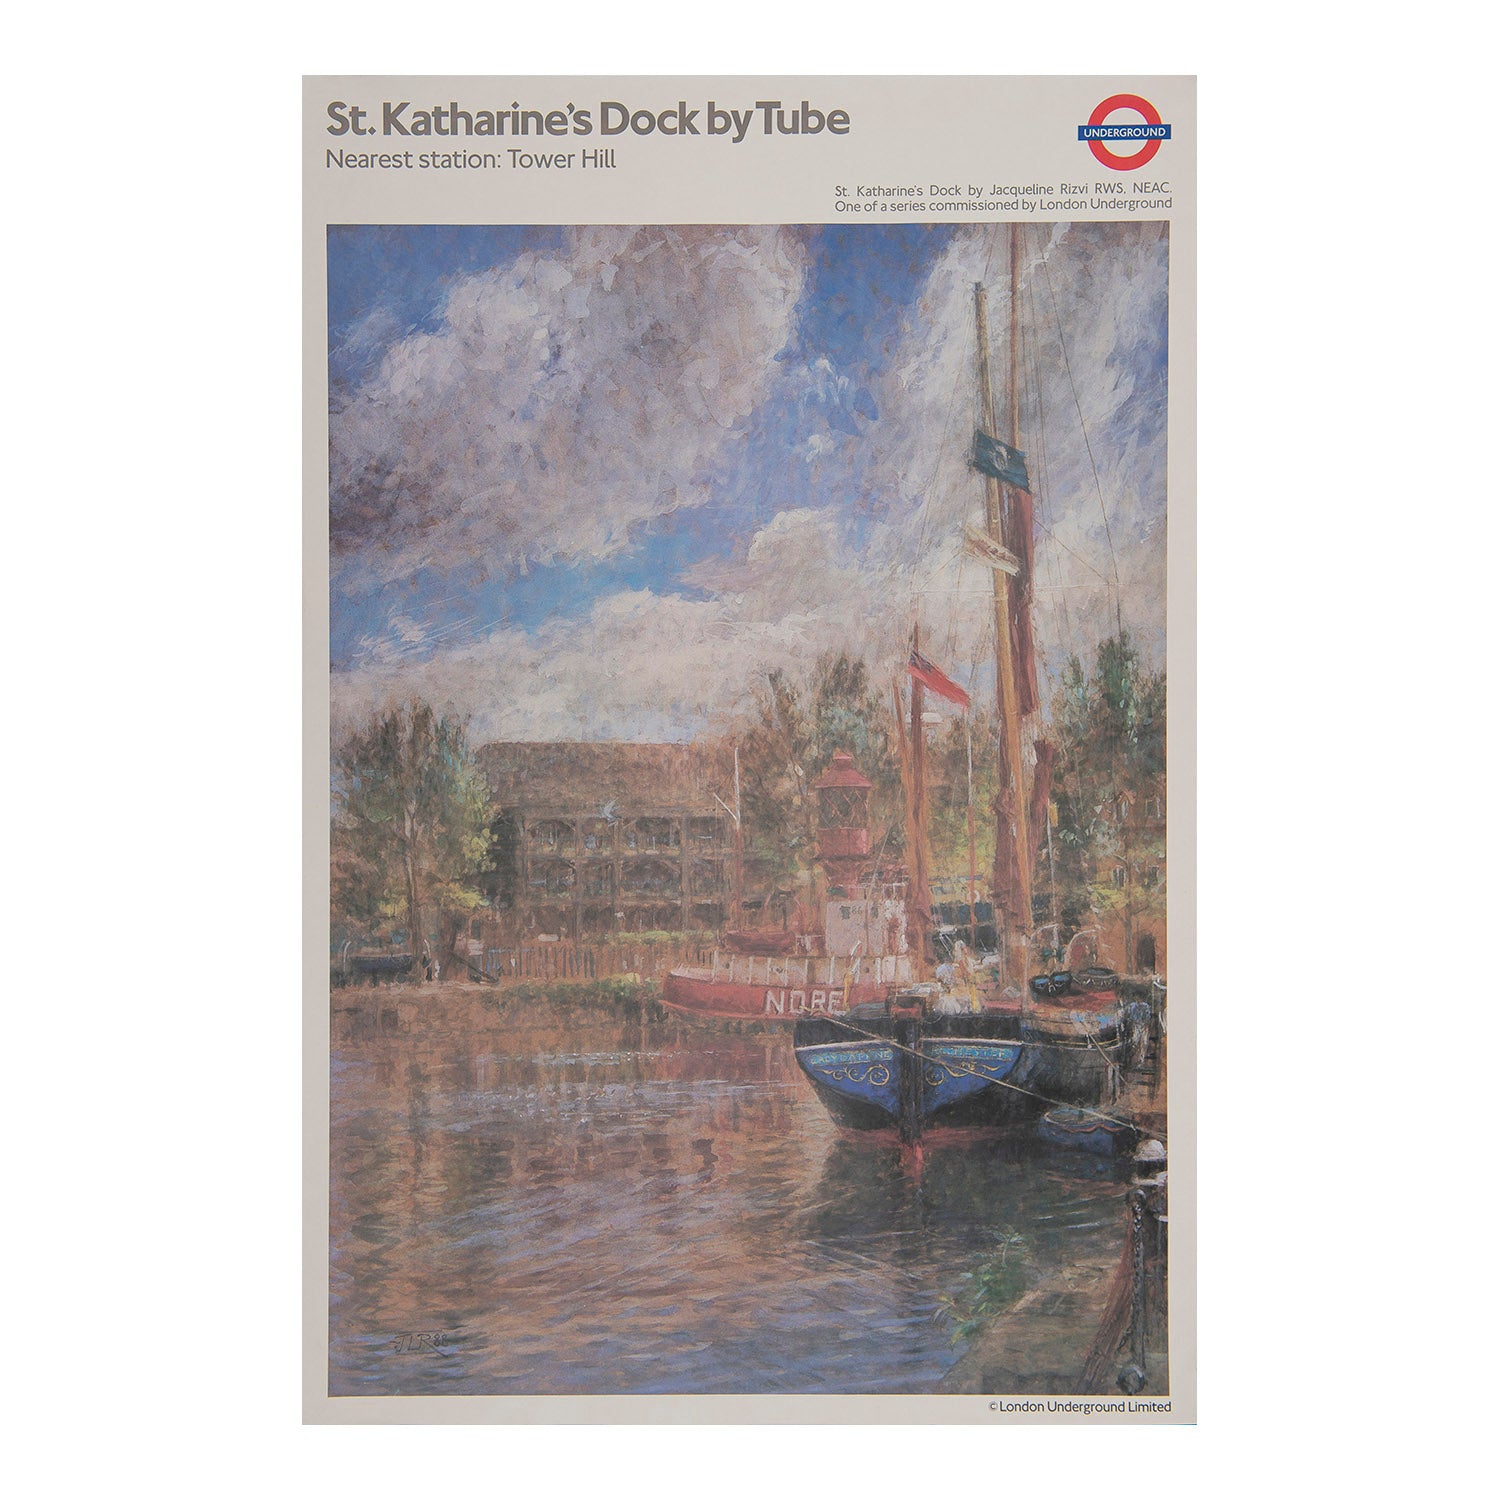 London Underground poster,St Katharine’s Dock, by Jacqueline Rizvi, 1988. Commissioned as part of the ‘Art on the Underground’ programme, Rizvi’s evocative painting features a tall-masted ship moored on the water with converted dockside flats in the background